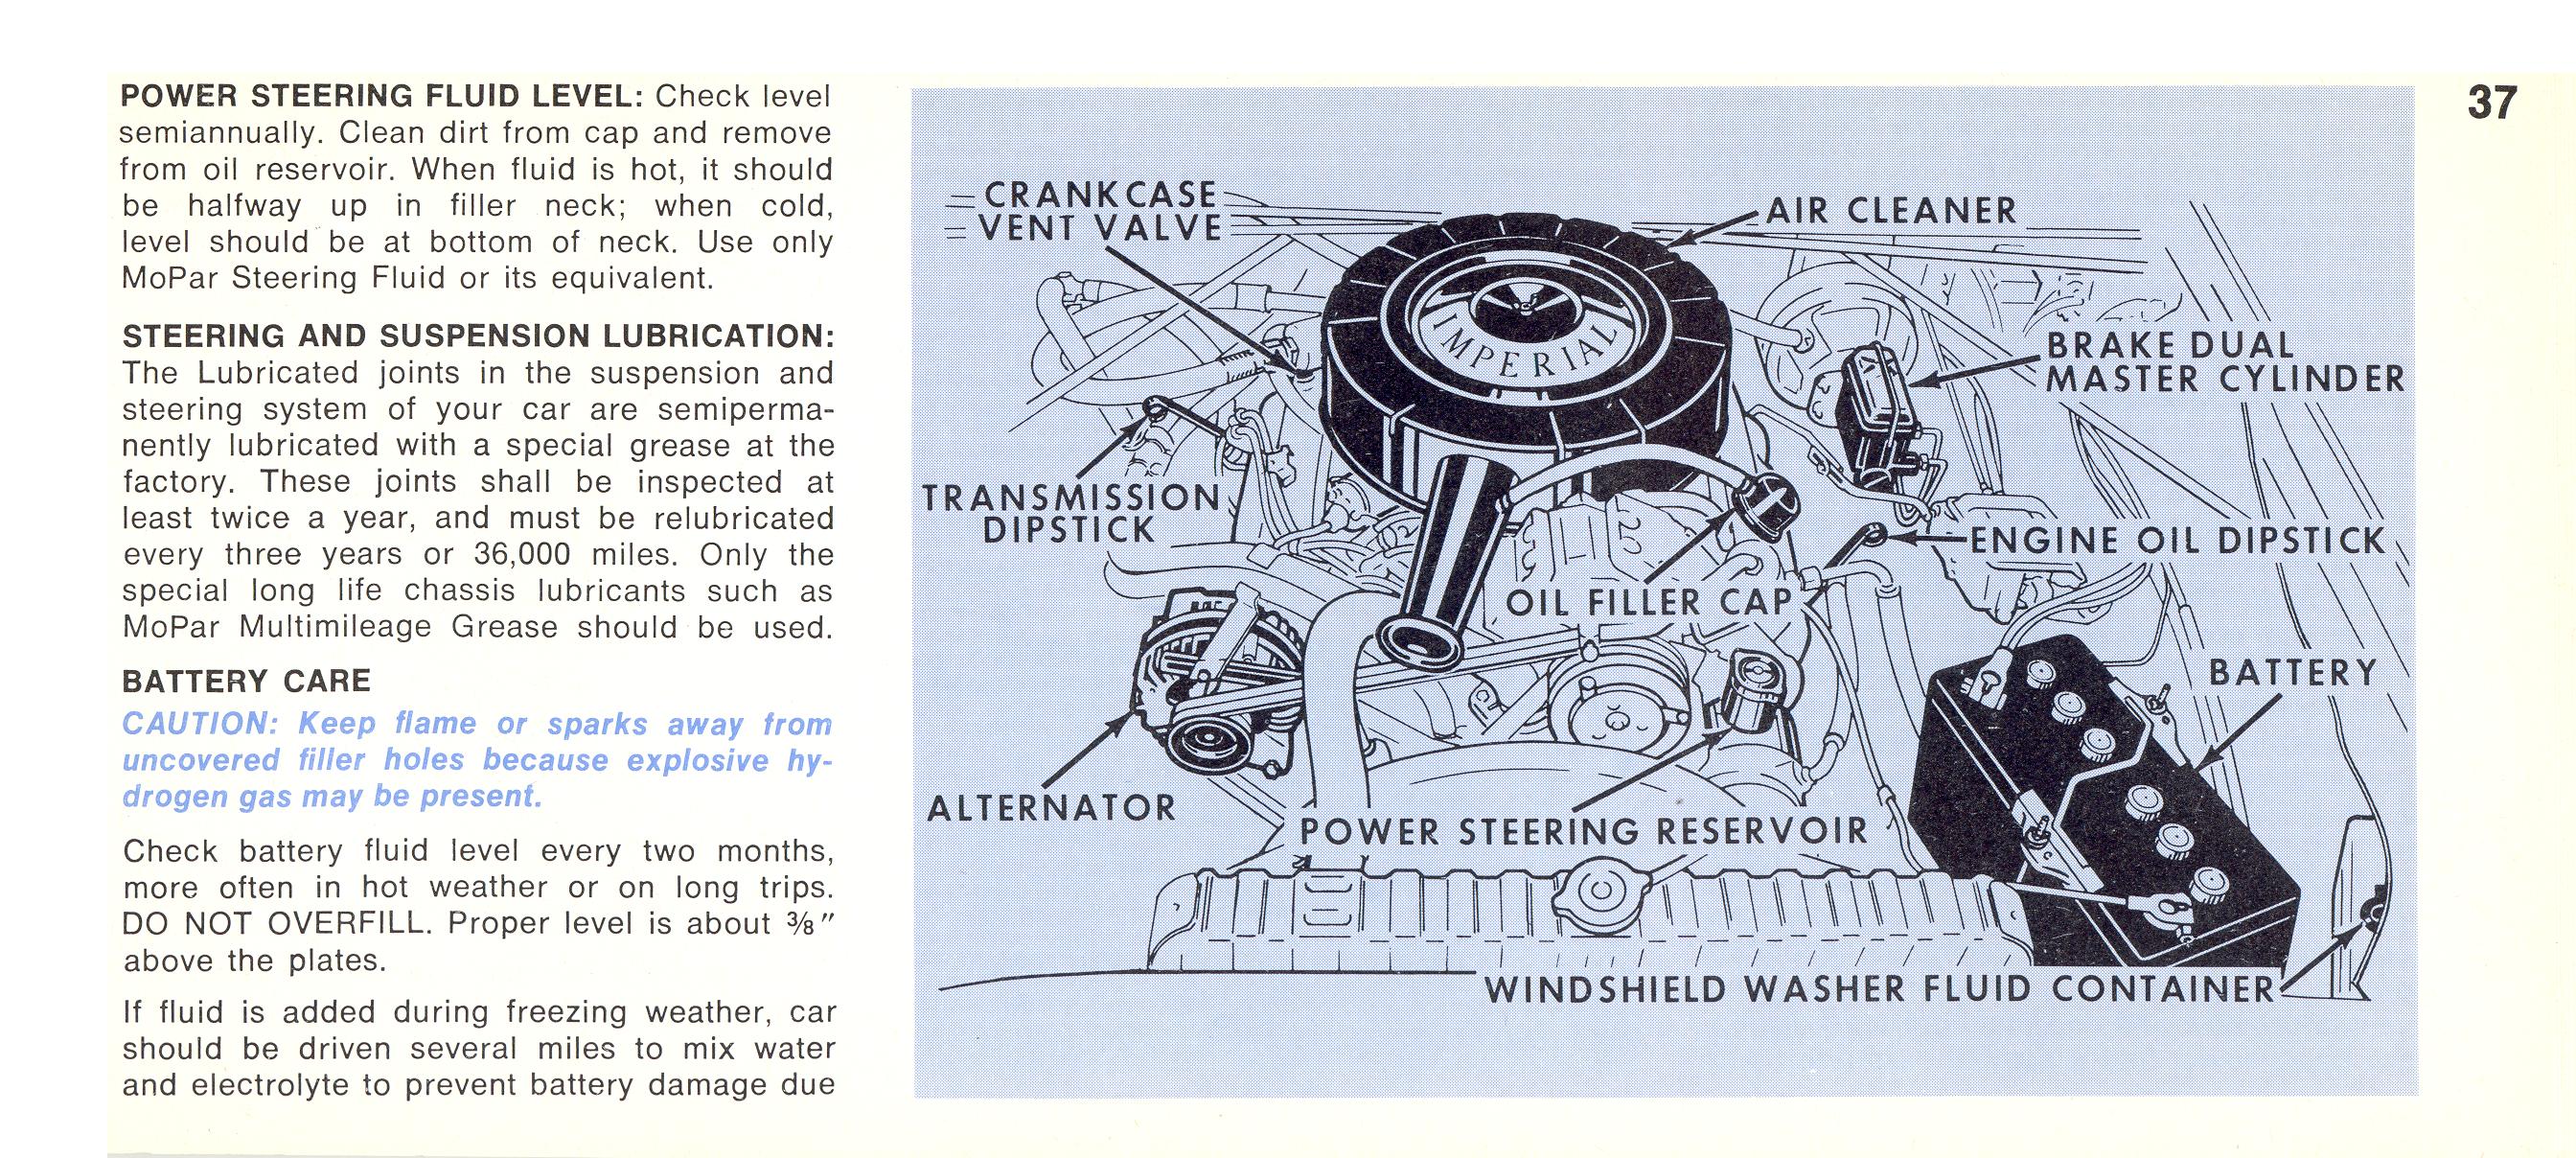 1968 Chrysler Imperial Owners Manual Page 24